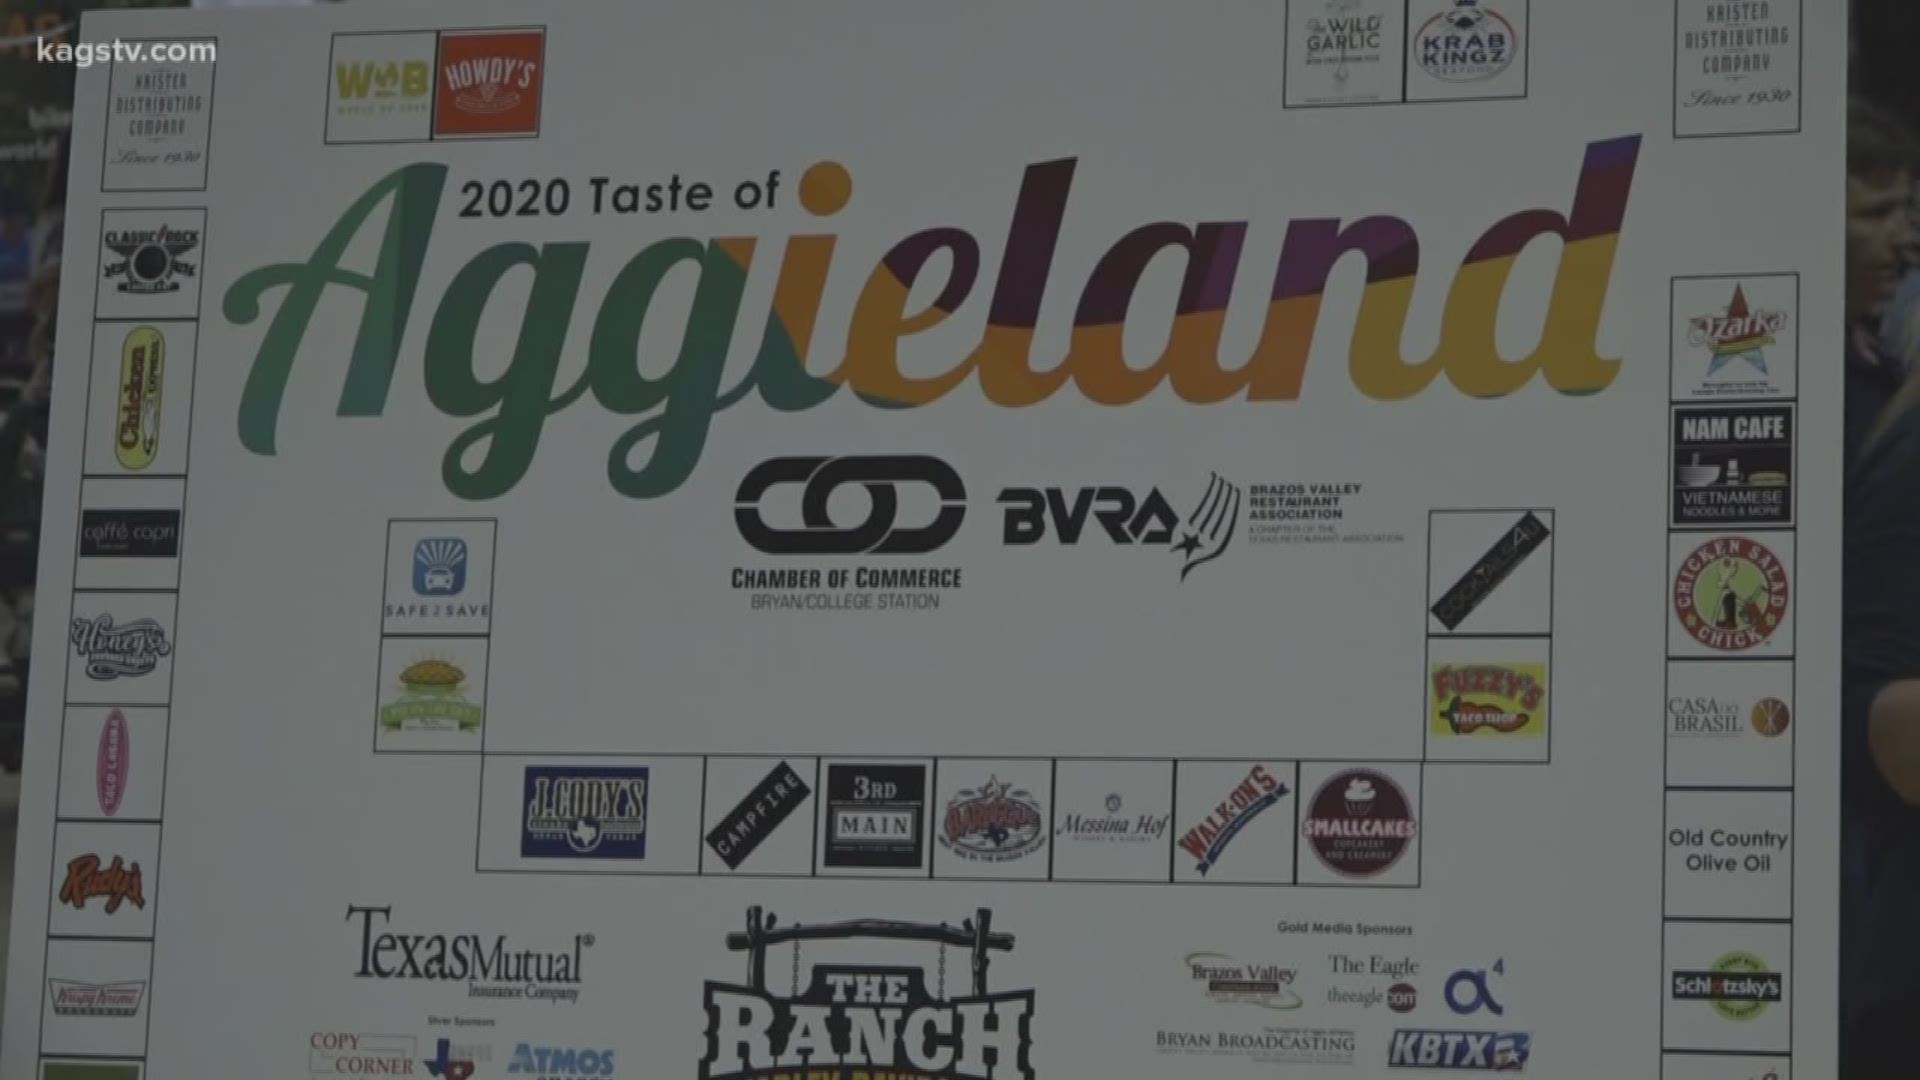 Food, food, and more food at the 2020 Taste of Aggieland event!